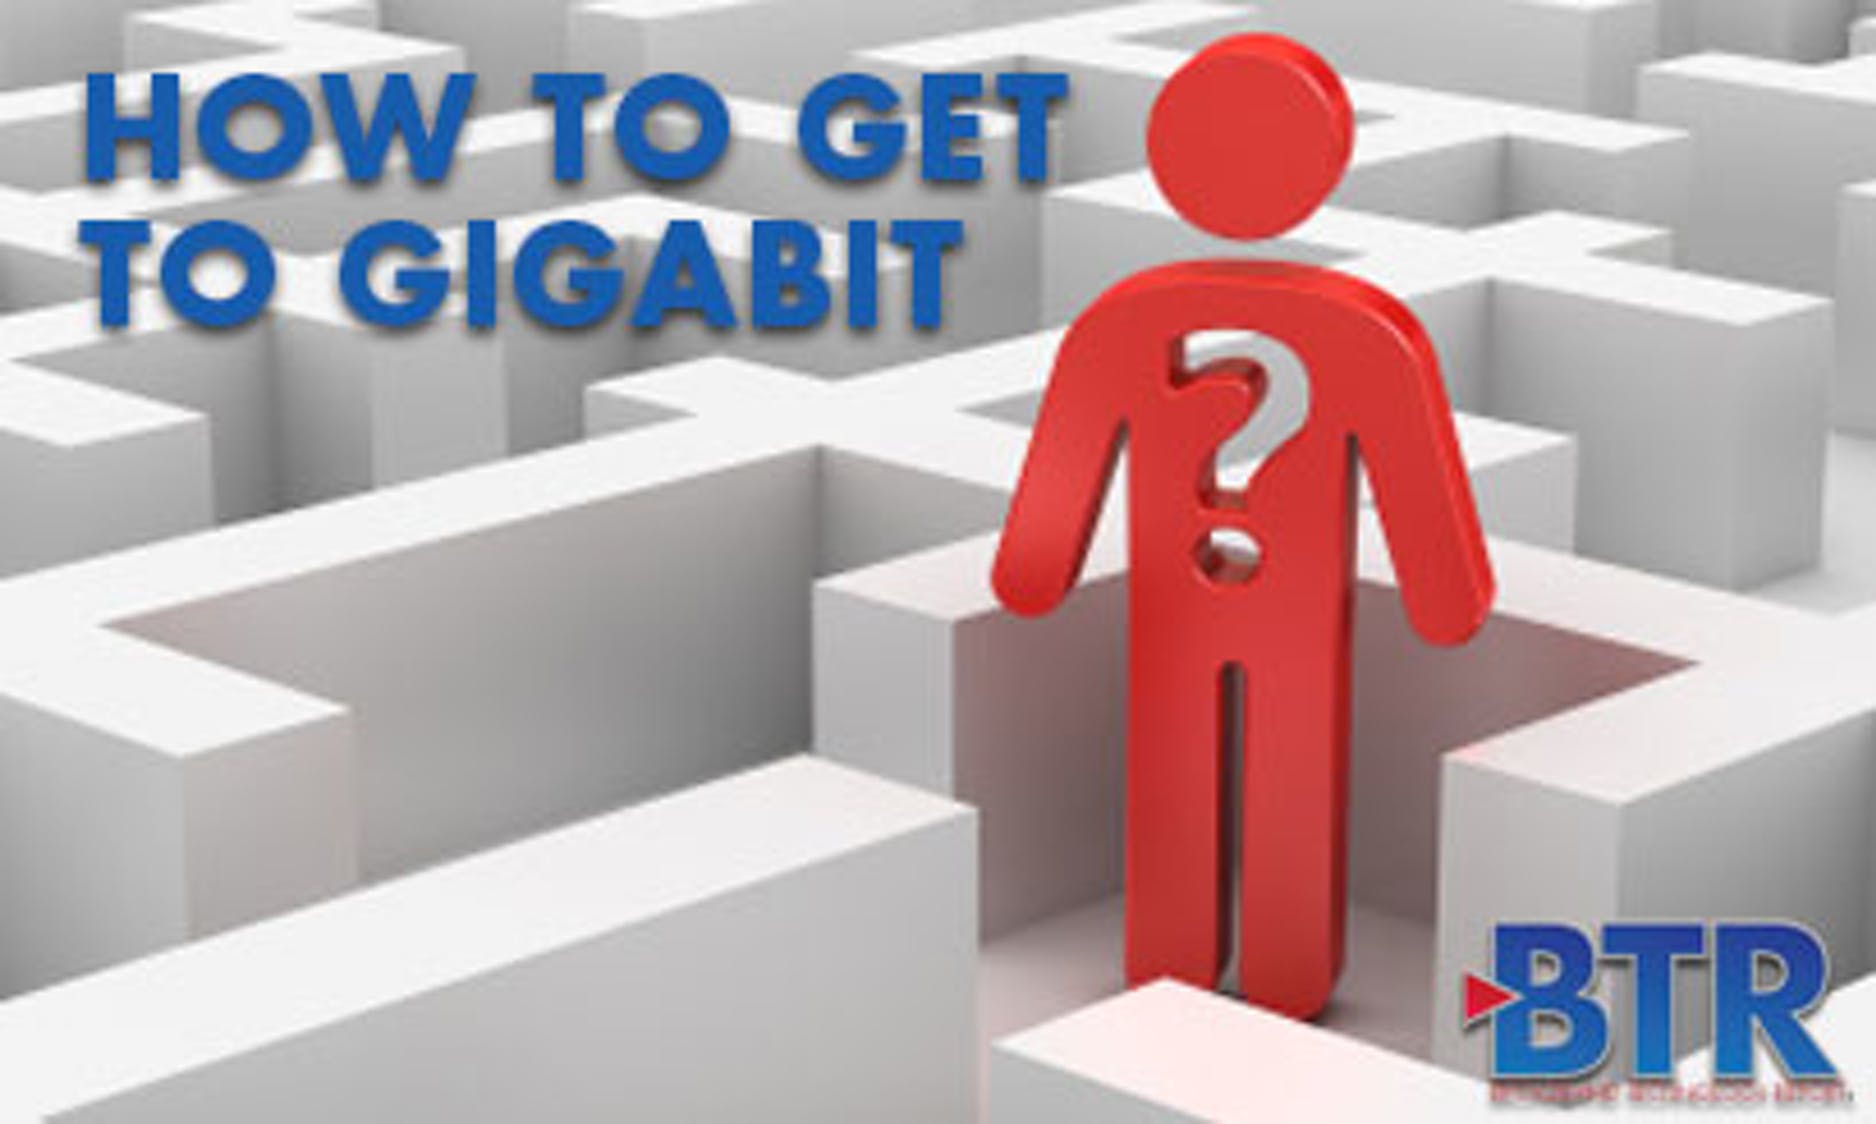 Gigabit: How Do We Get There from Here?